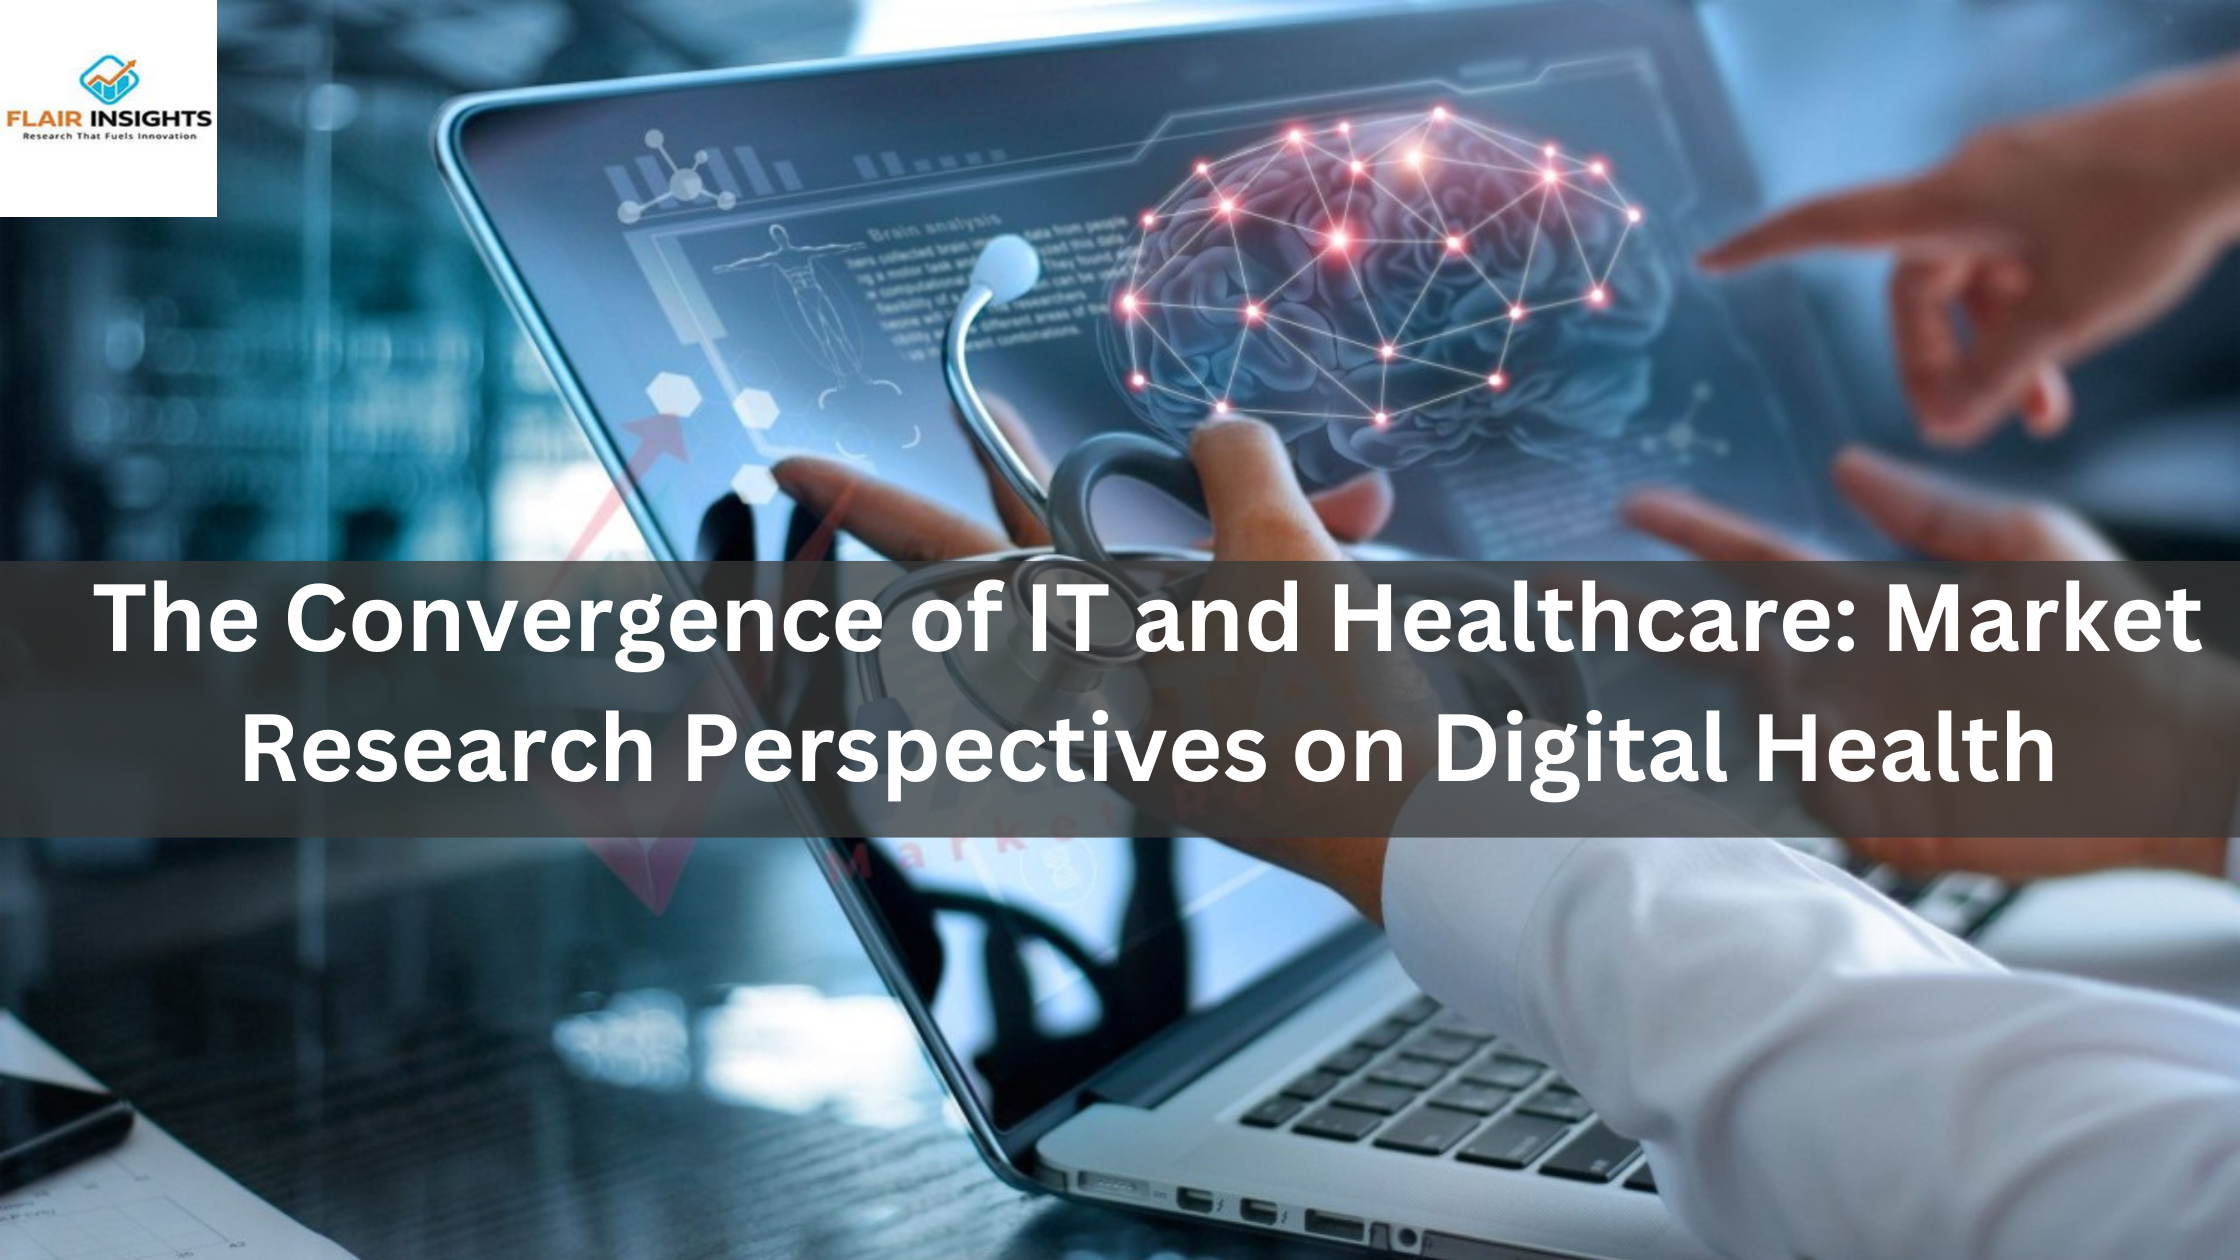 The Convergence of IT and Healthcare: Market Research Perspectives on Digital Health